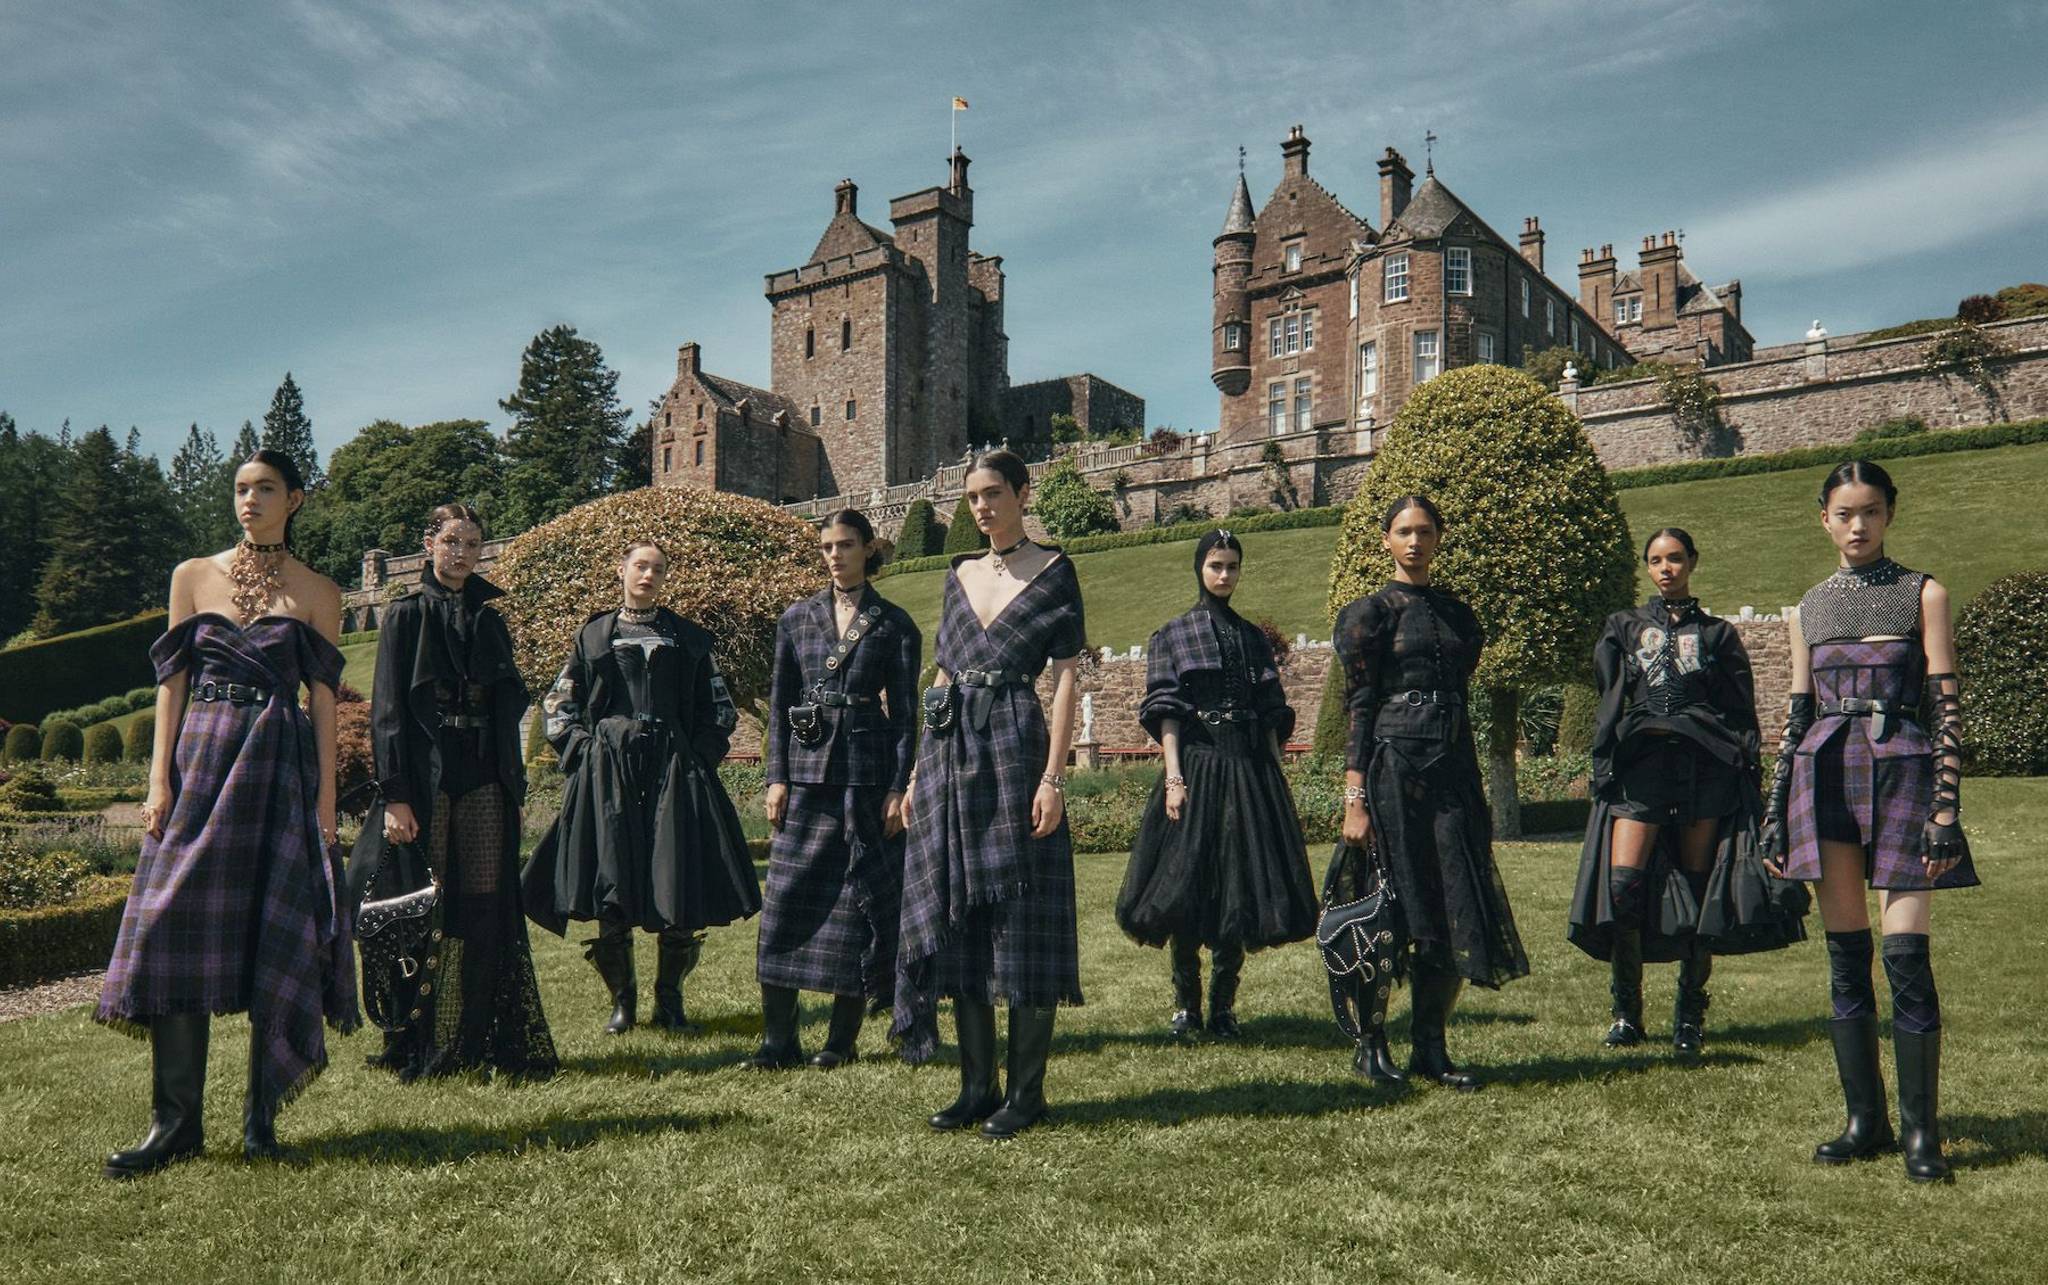 Dior collabs with local artisans for Scotland show